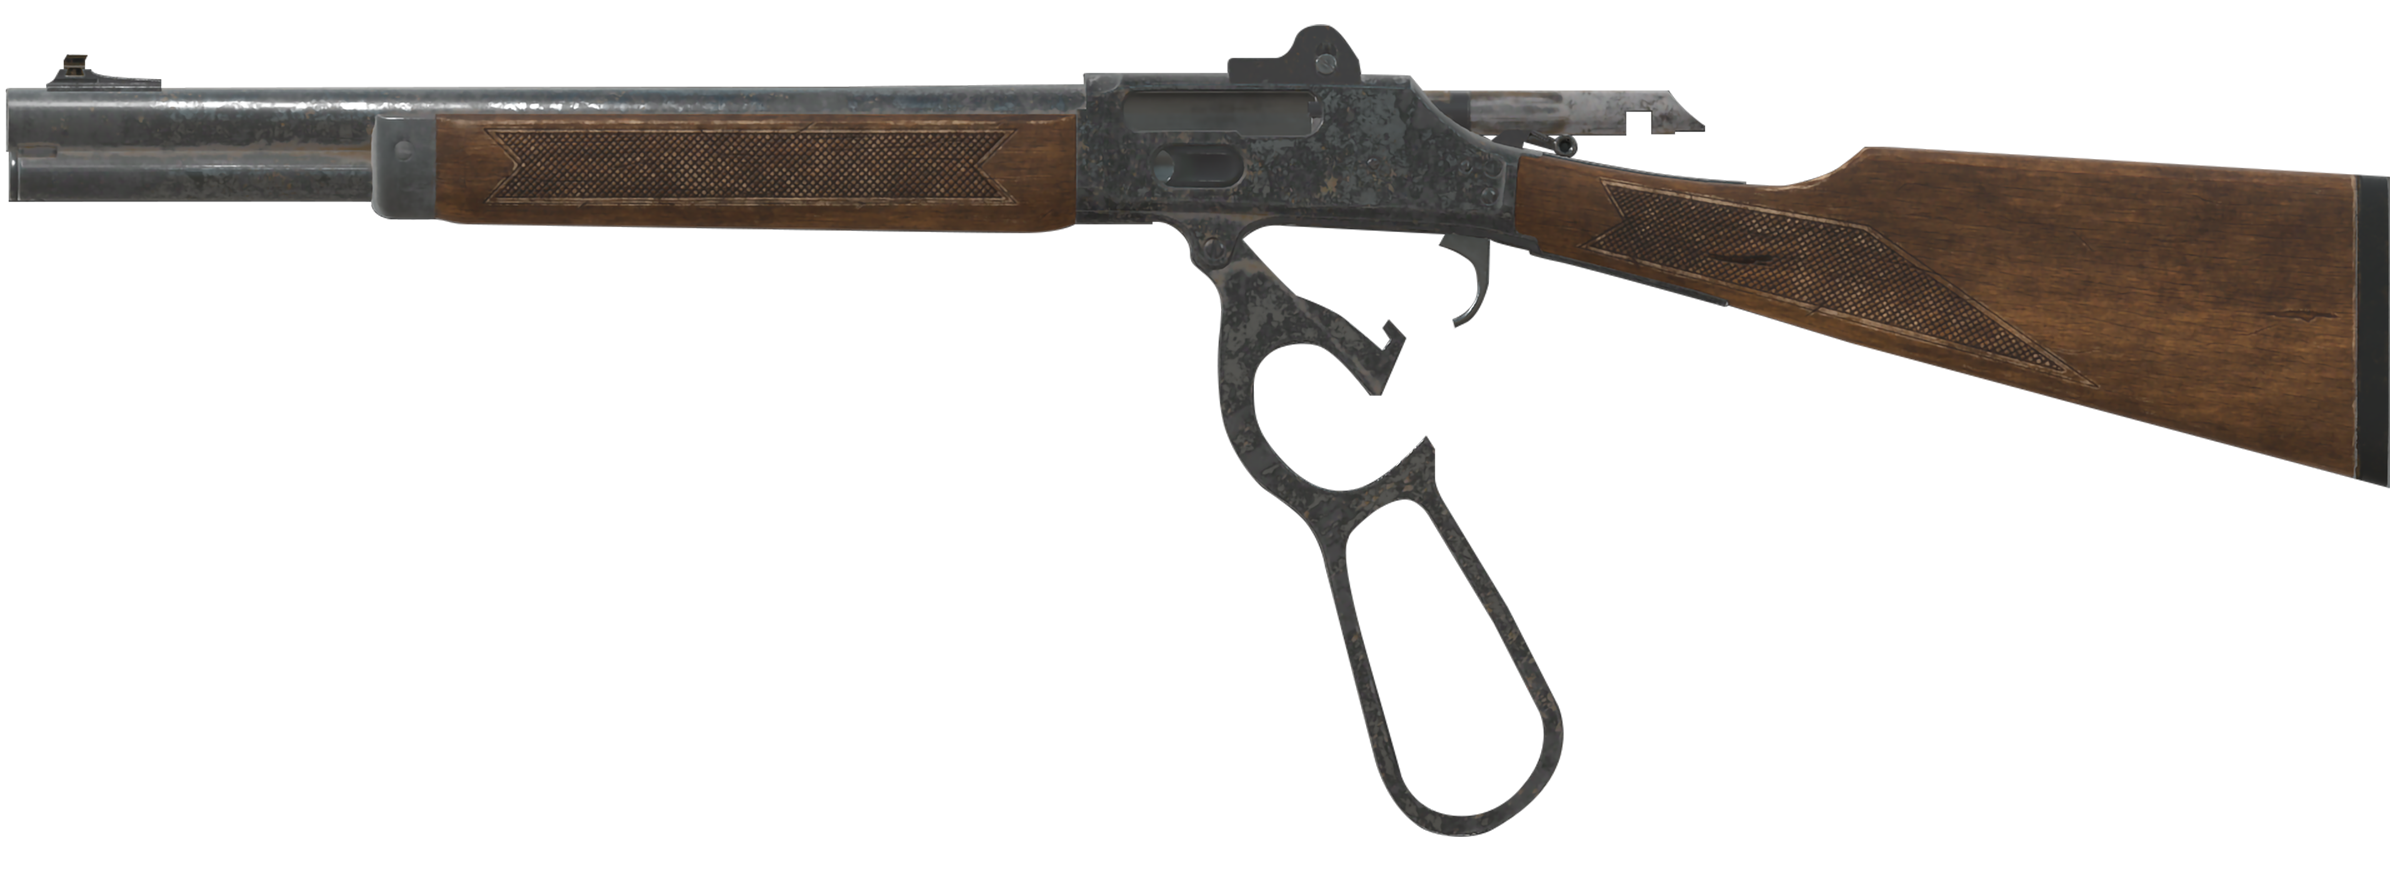 fallout 4 lever action rifle mod